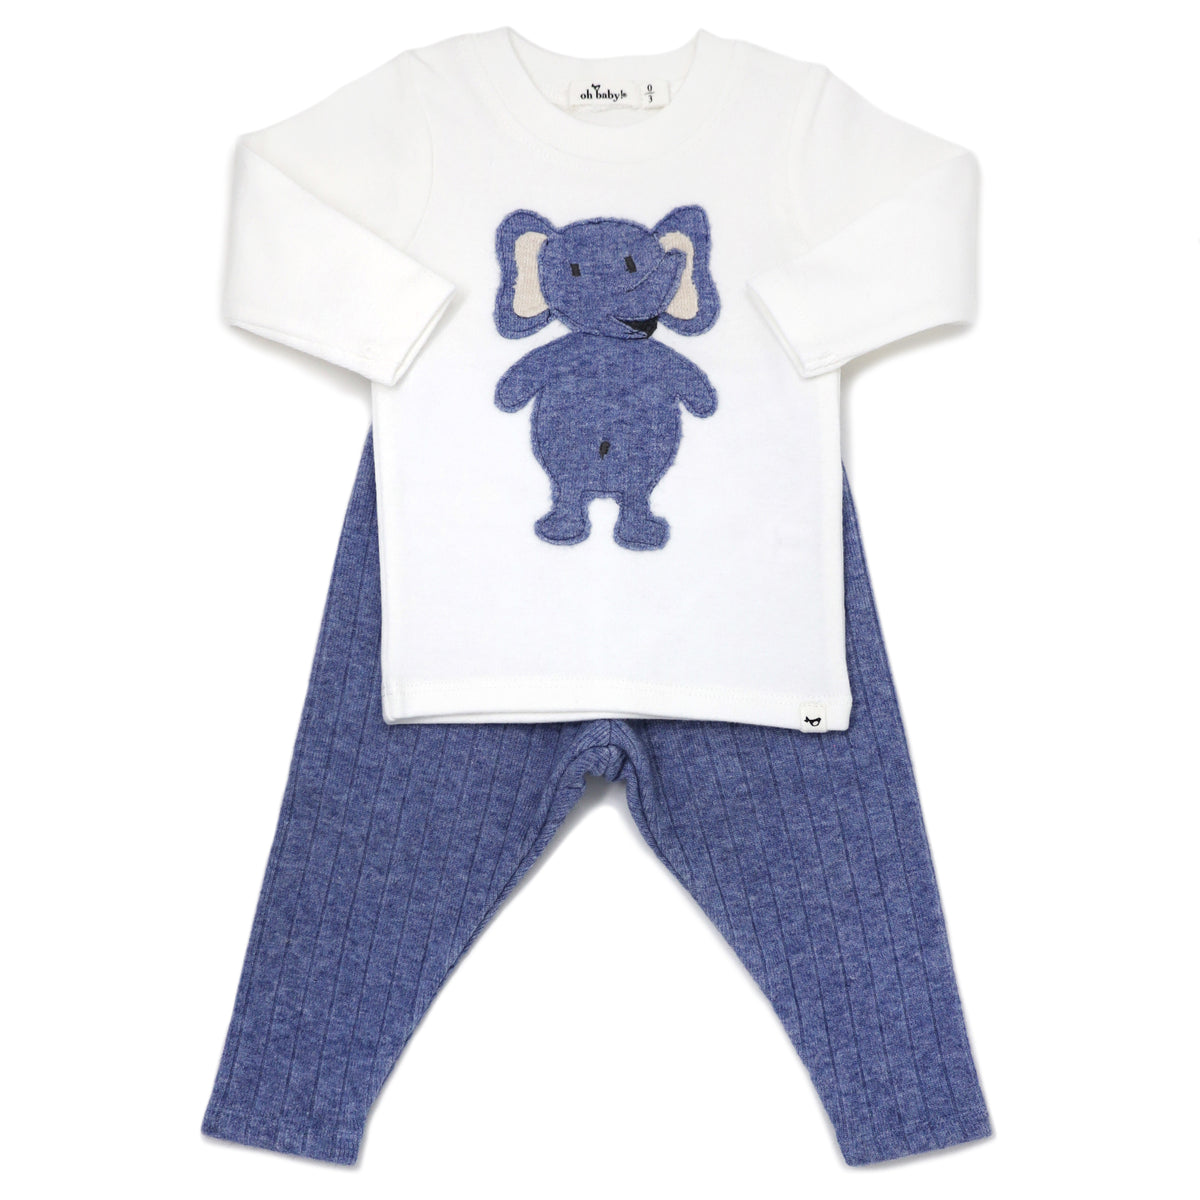 oh baby! Long Sleeve Two Piece Set -  Ragdoll Elephant Blue Heather Ribbed Knit - Cream